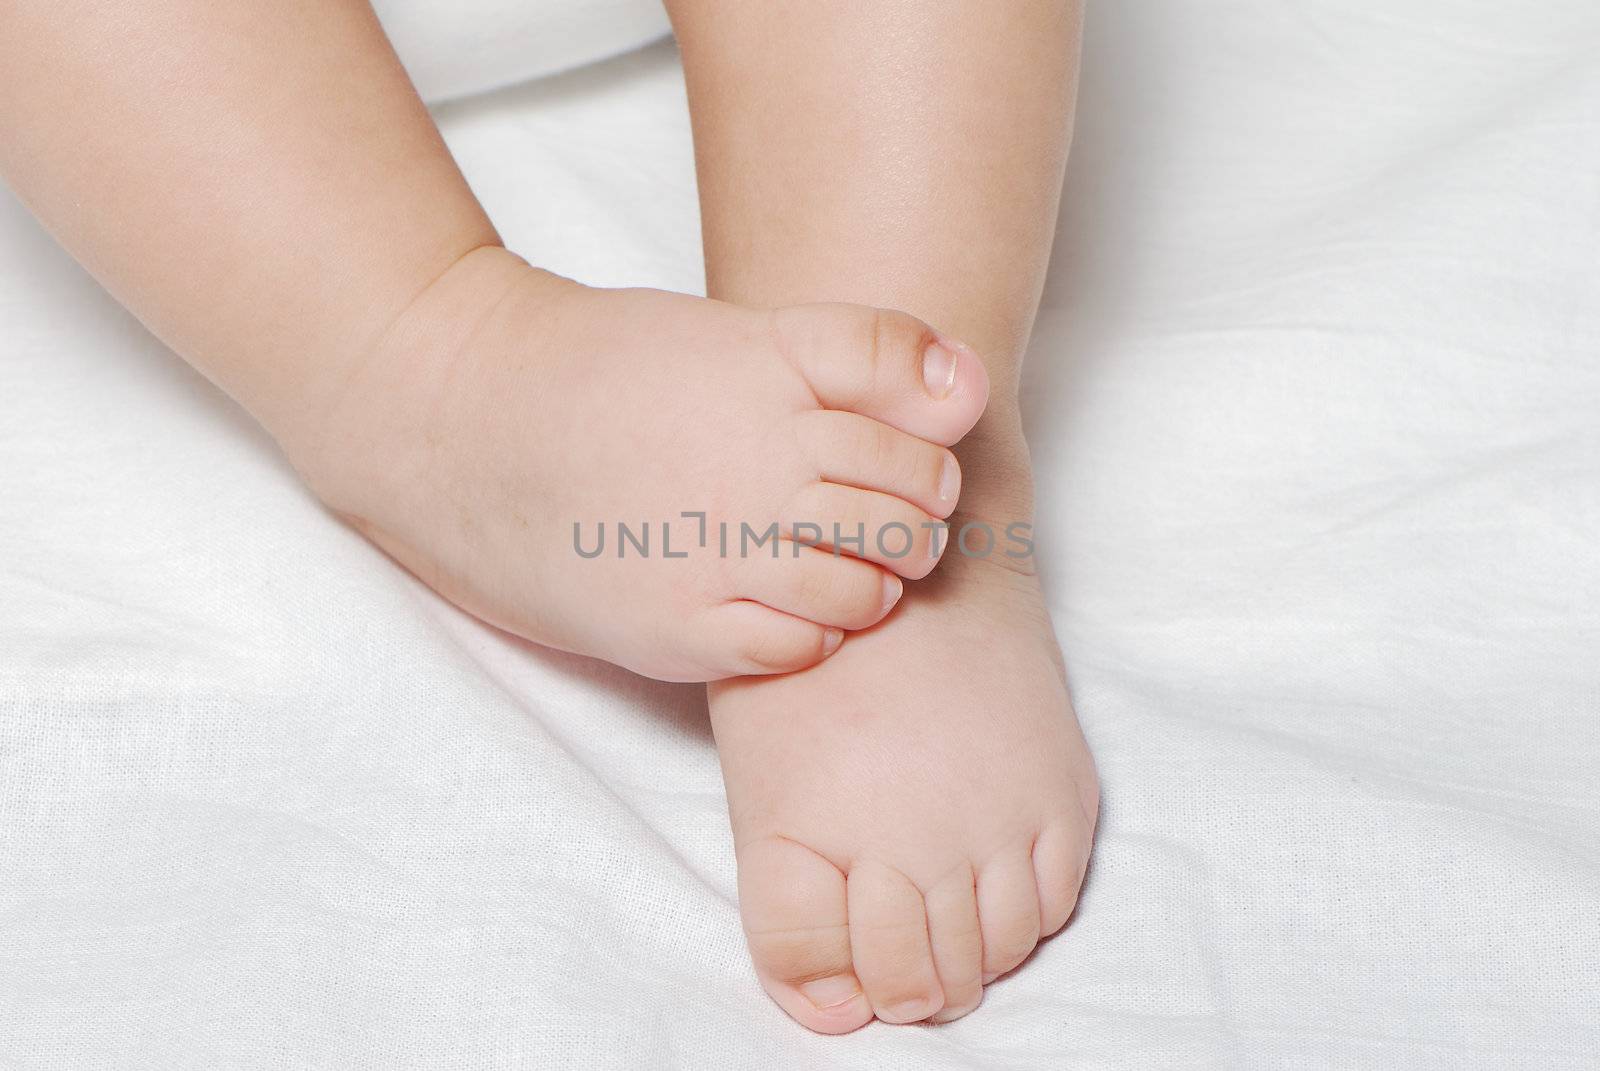 Legs of the baby on a light background